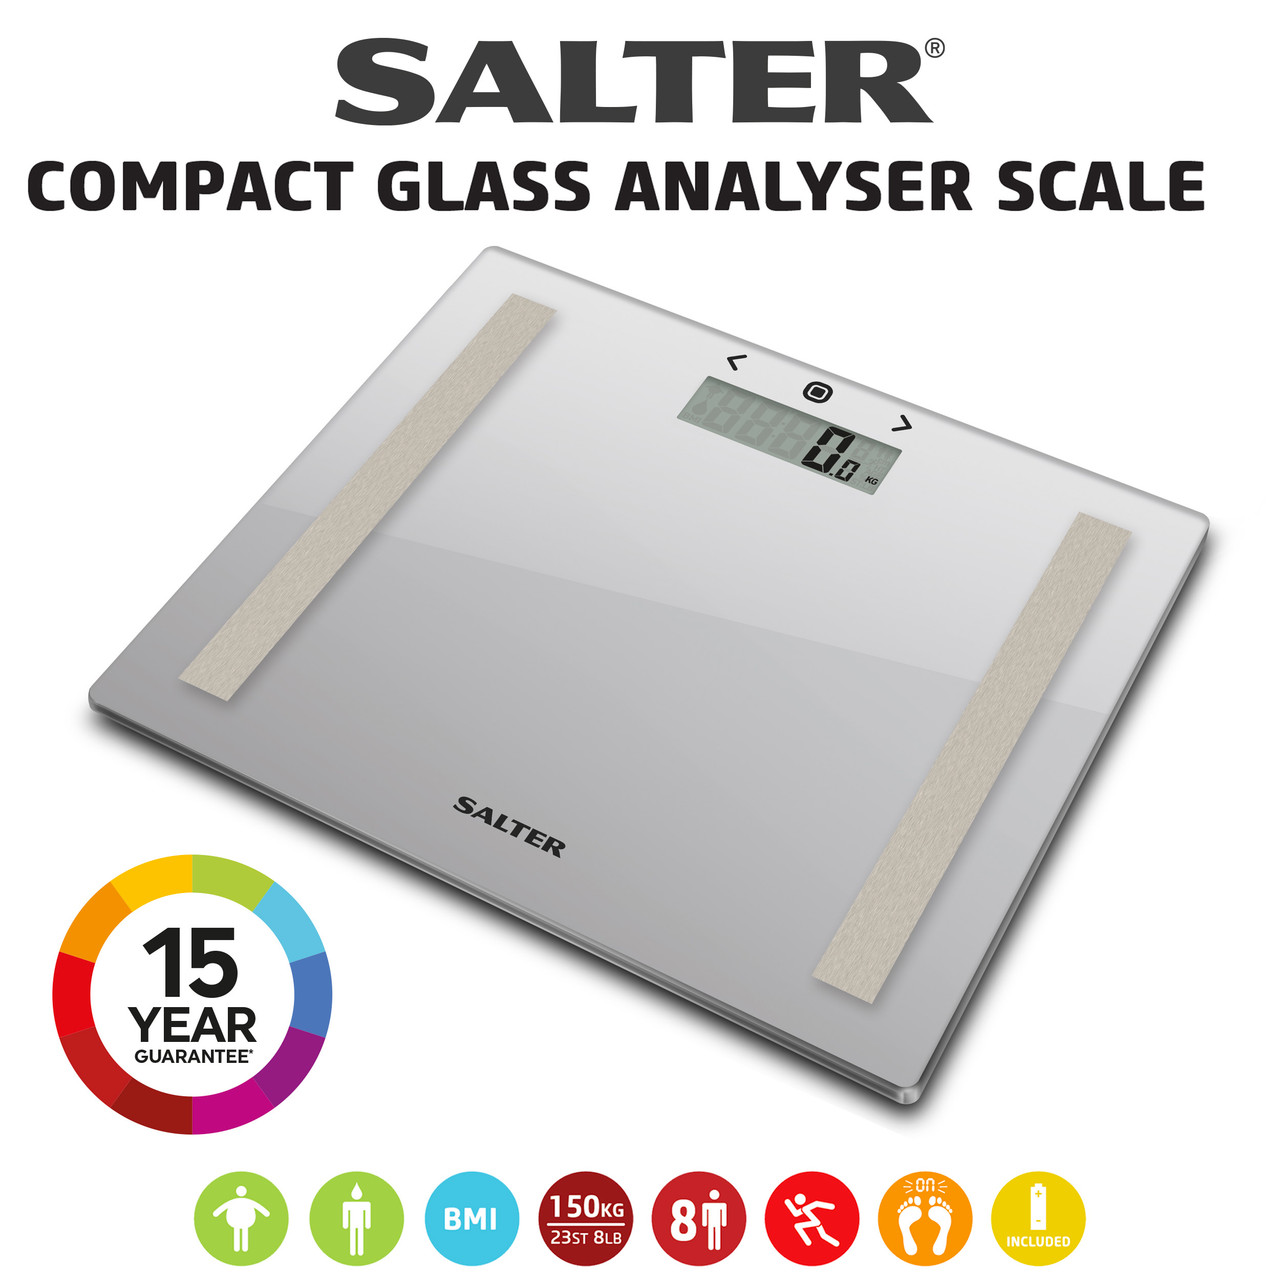 https://cdn11.bigcommerce.com/s-5vfc75n1yv/images/stencil/1280x1280/products/1848/17251/compact-glass-analyser-bathroom-scale-silver-measures-weight-body-fat-percent-body-water-percent-and-bmi-salter-9113-sv3r-bgc-5010777145809__61886.1666277179.jpg?c=1